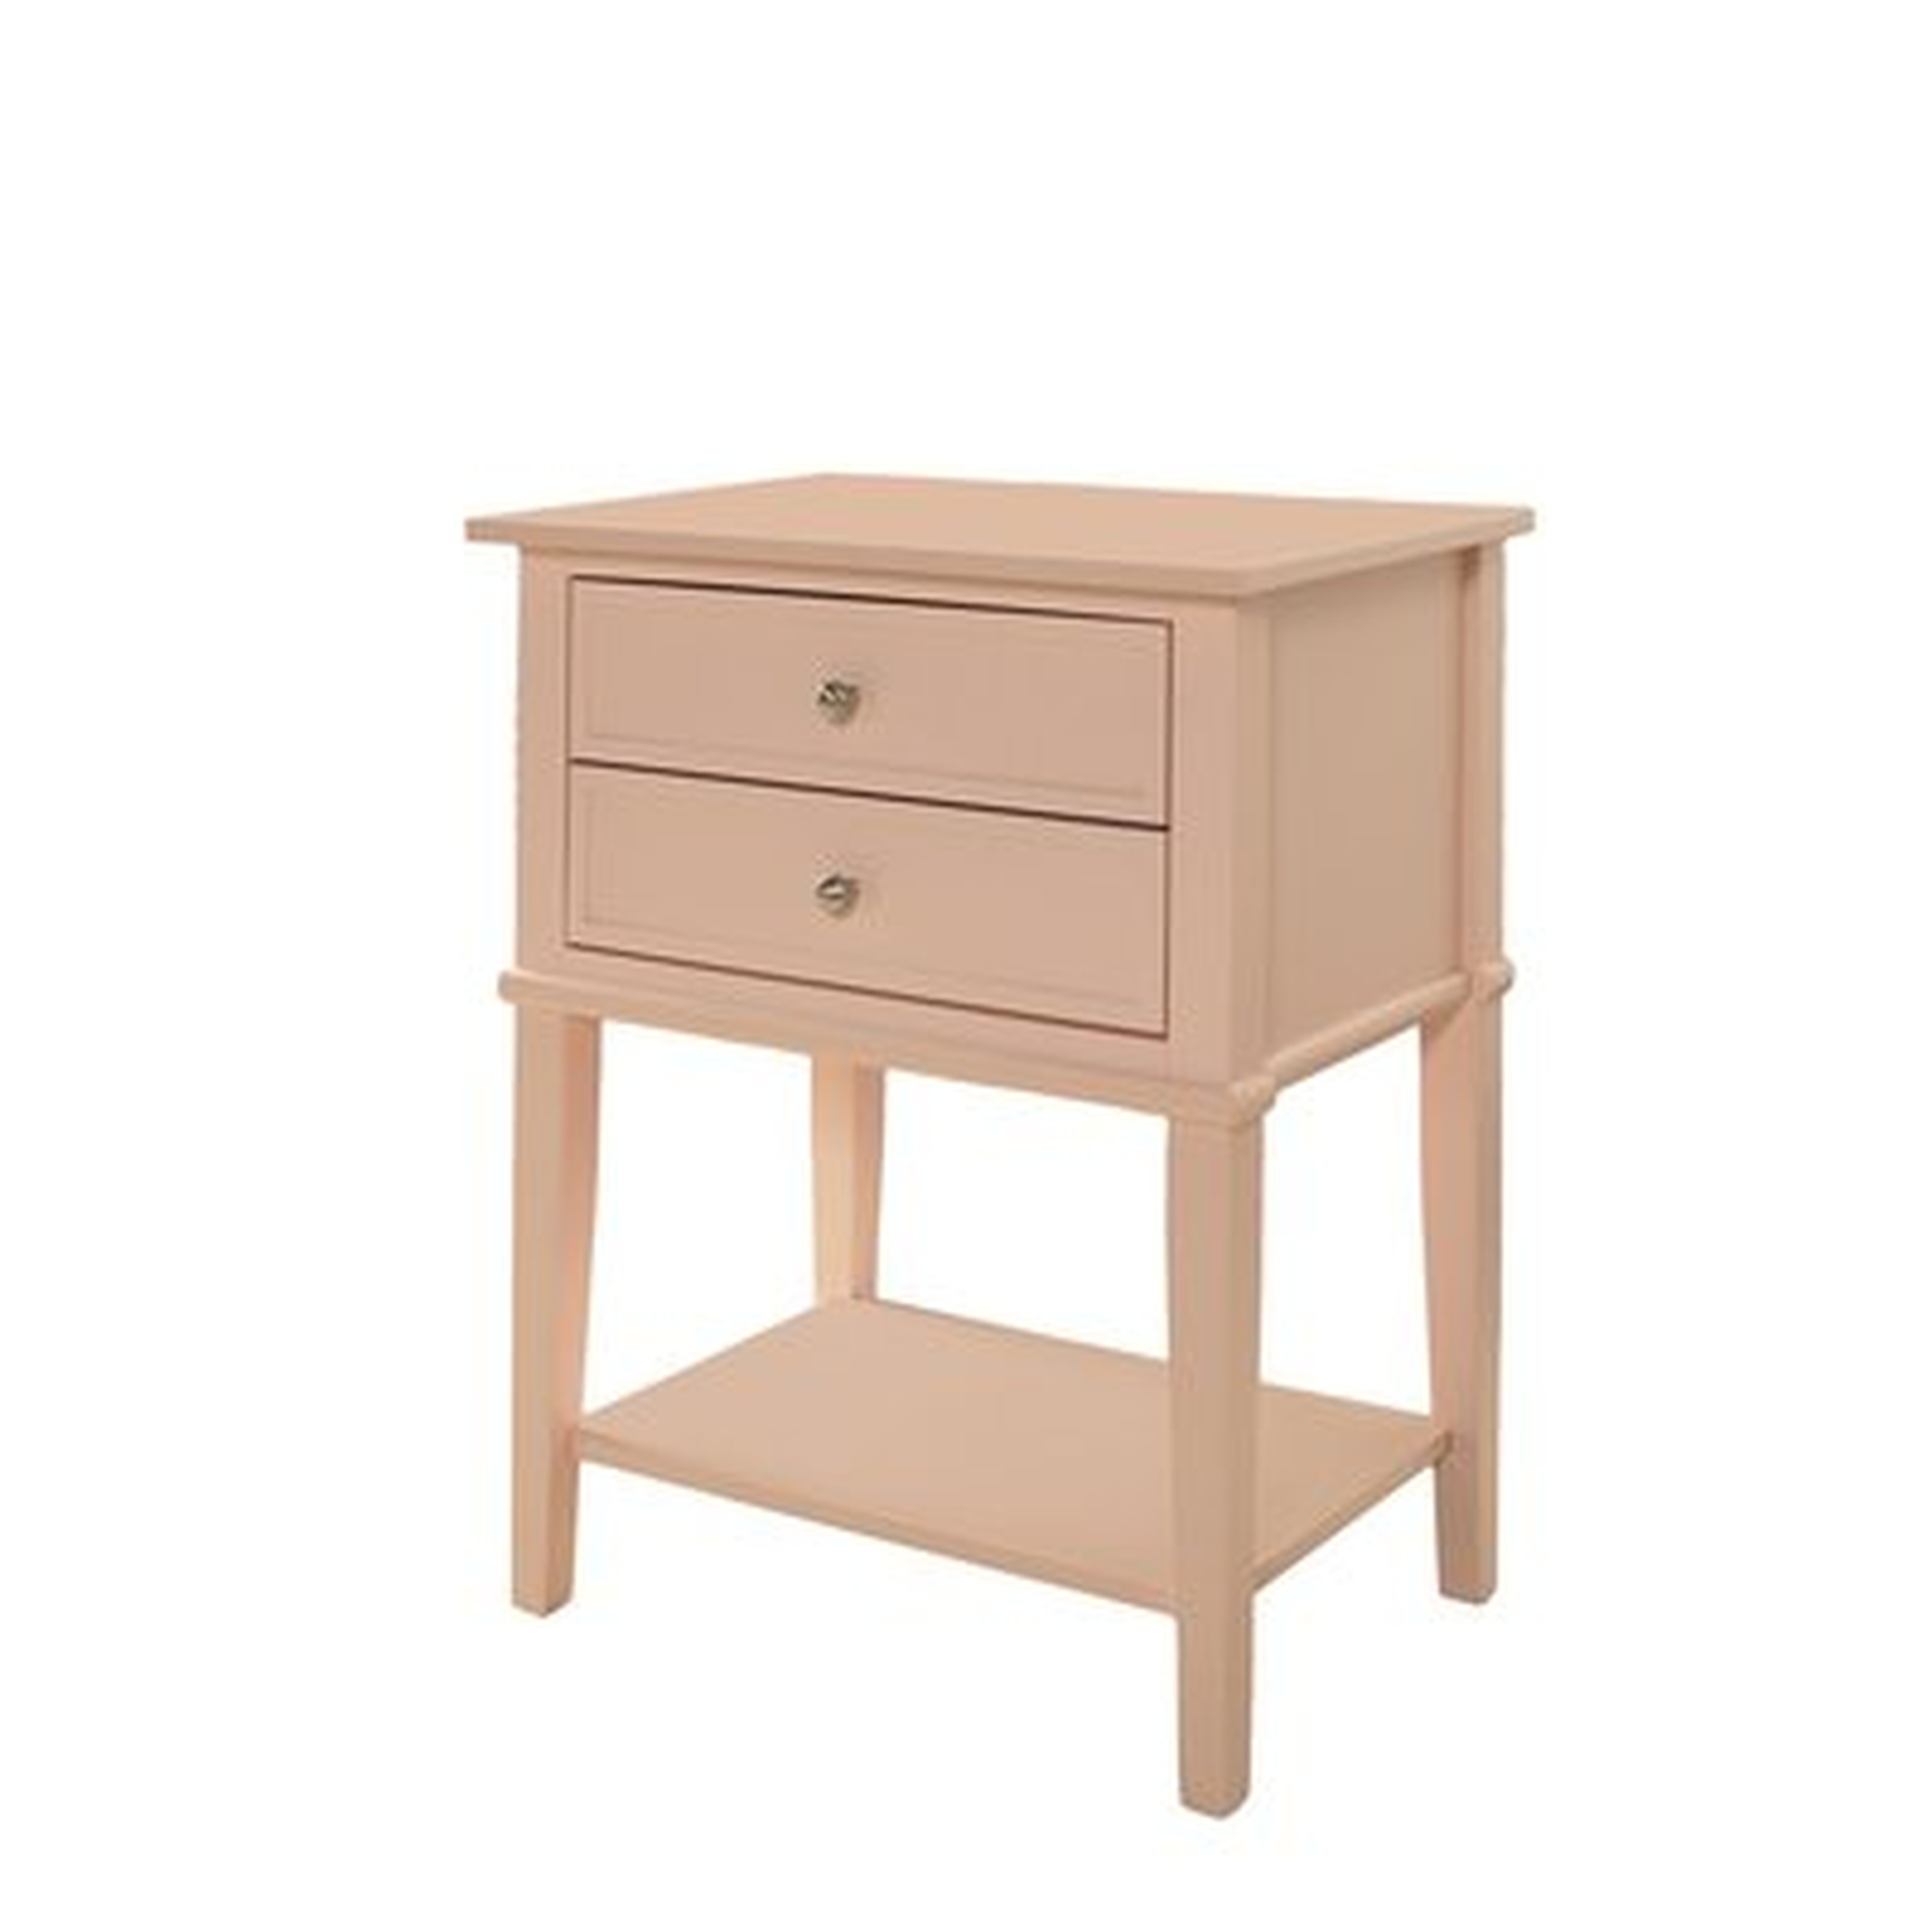 Dmitry End Table With Storage - Wayfair